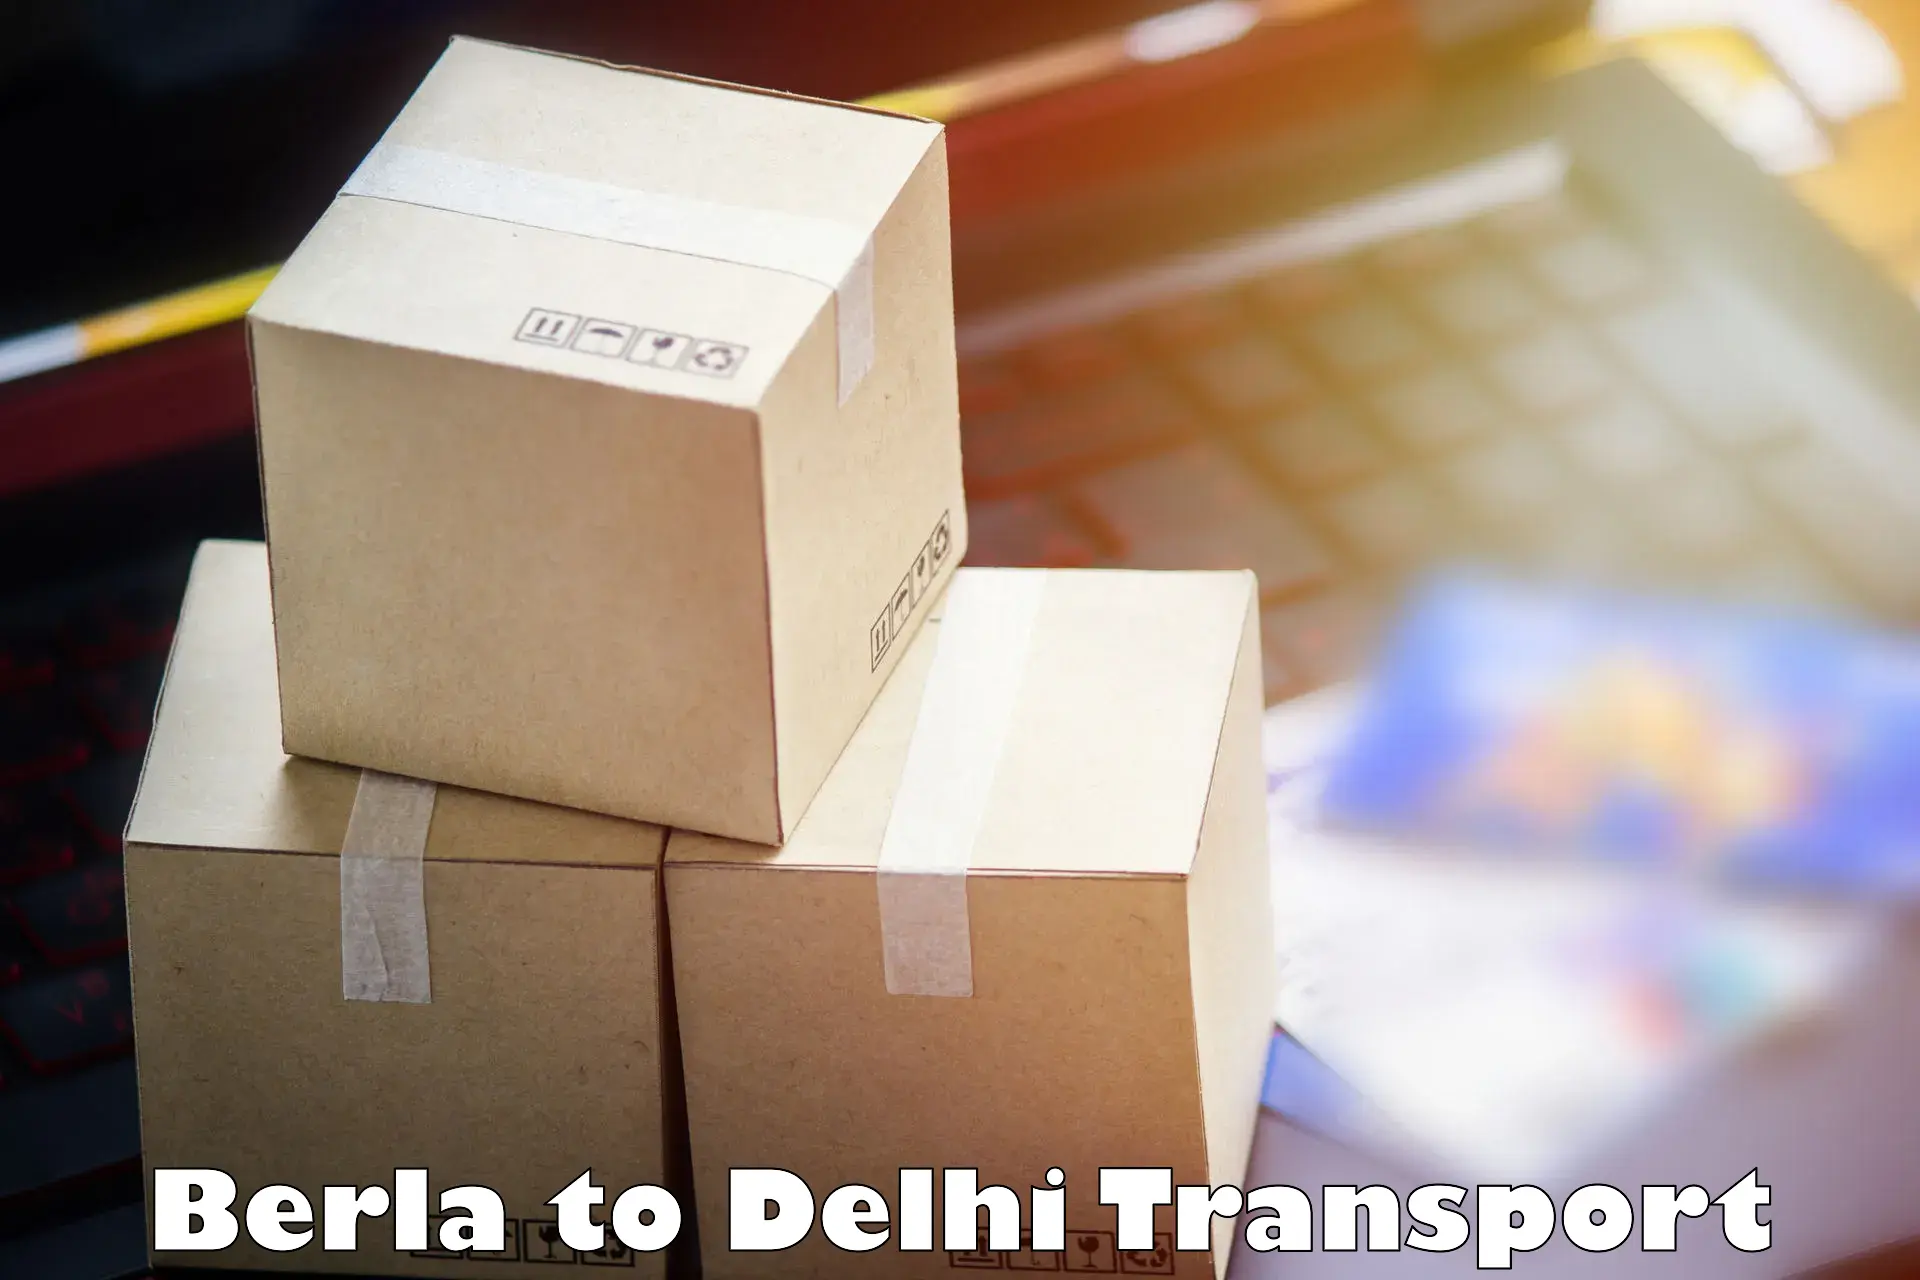 Goods delivery service Berla to NCR